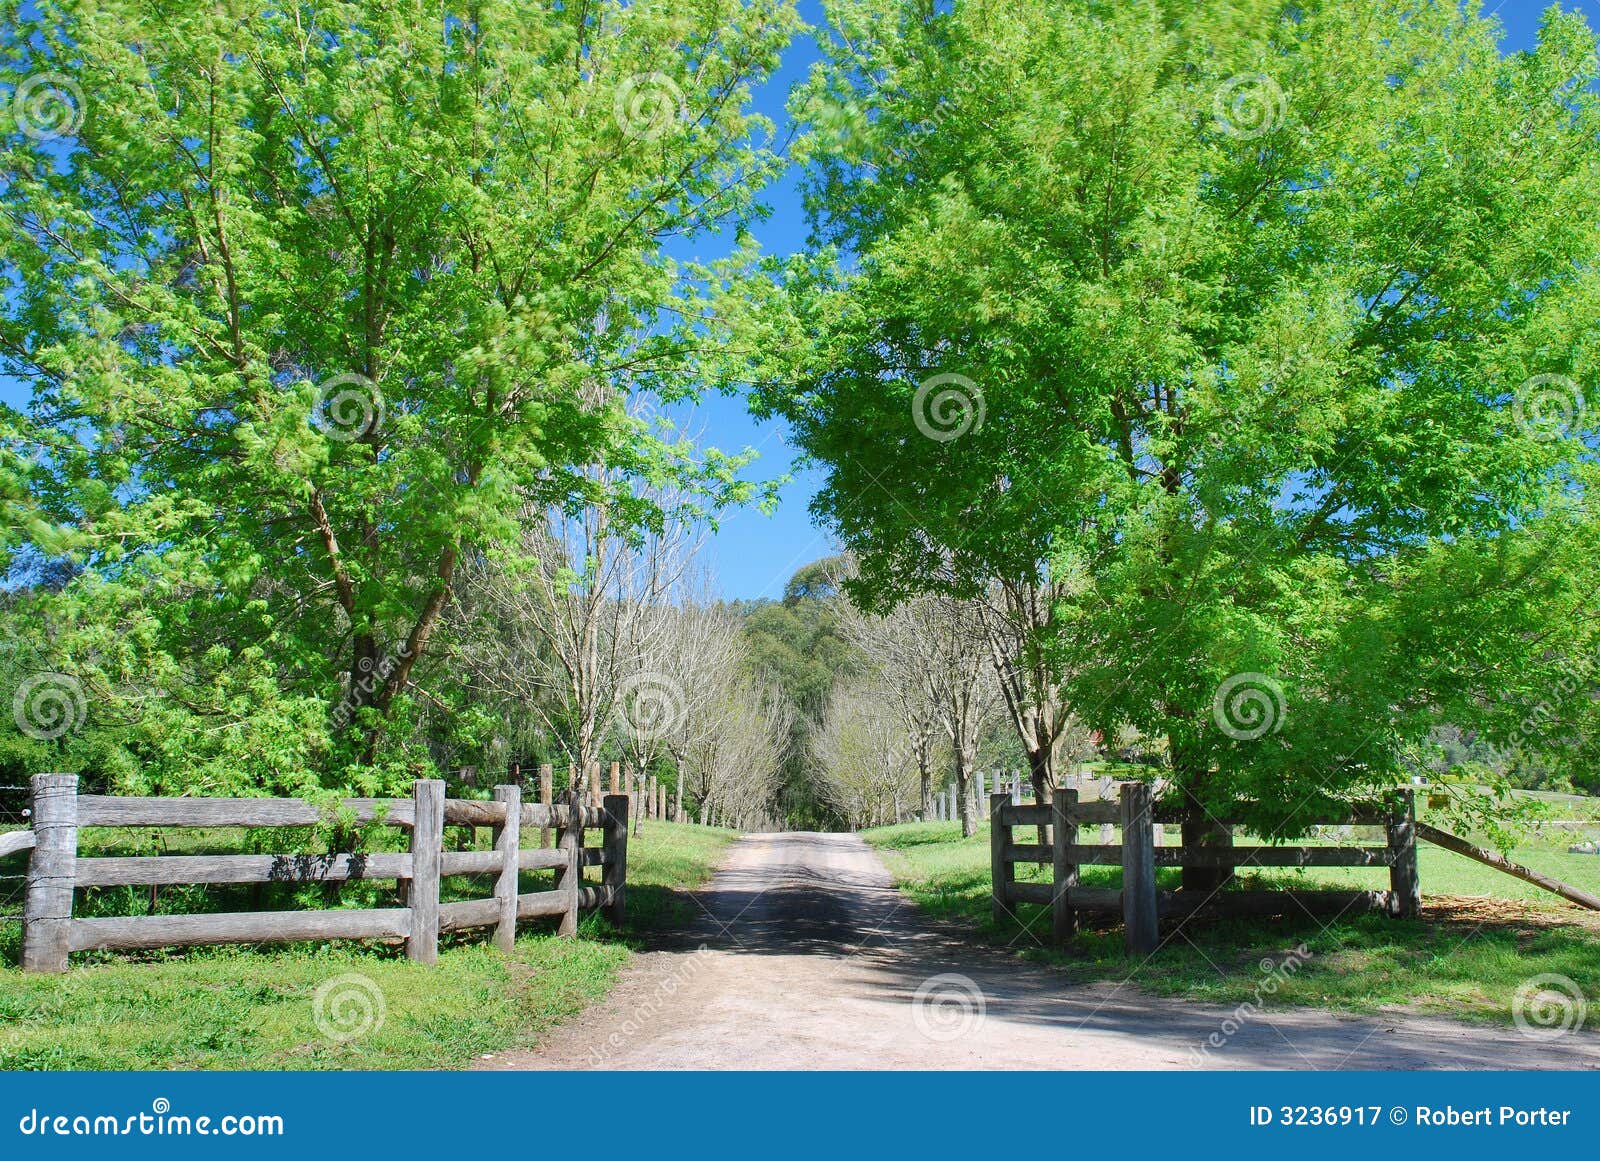 Country Driveway Royalty Free Stock Photography - Image ...